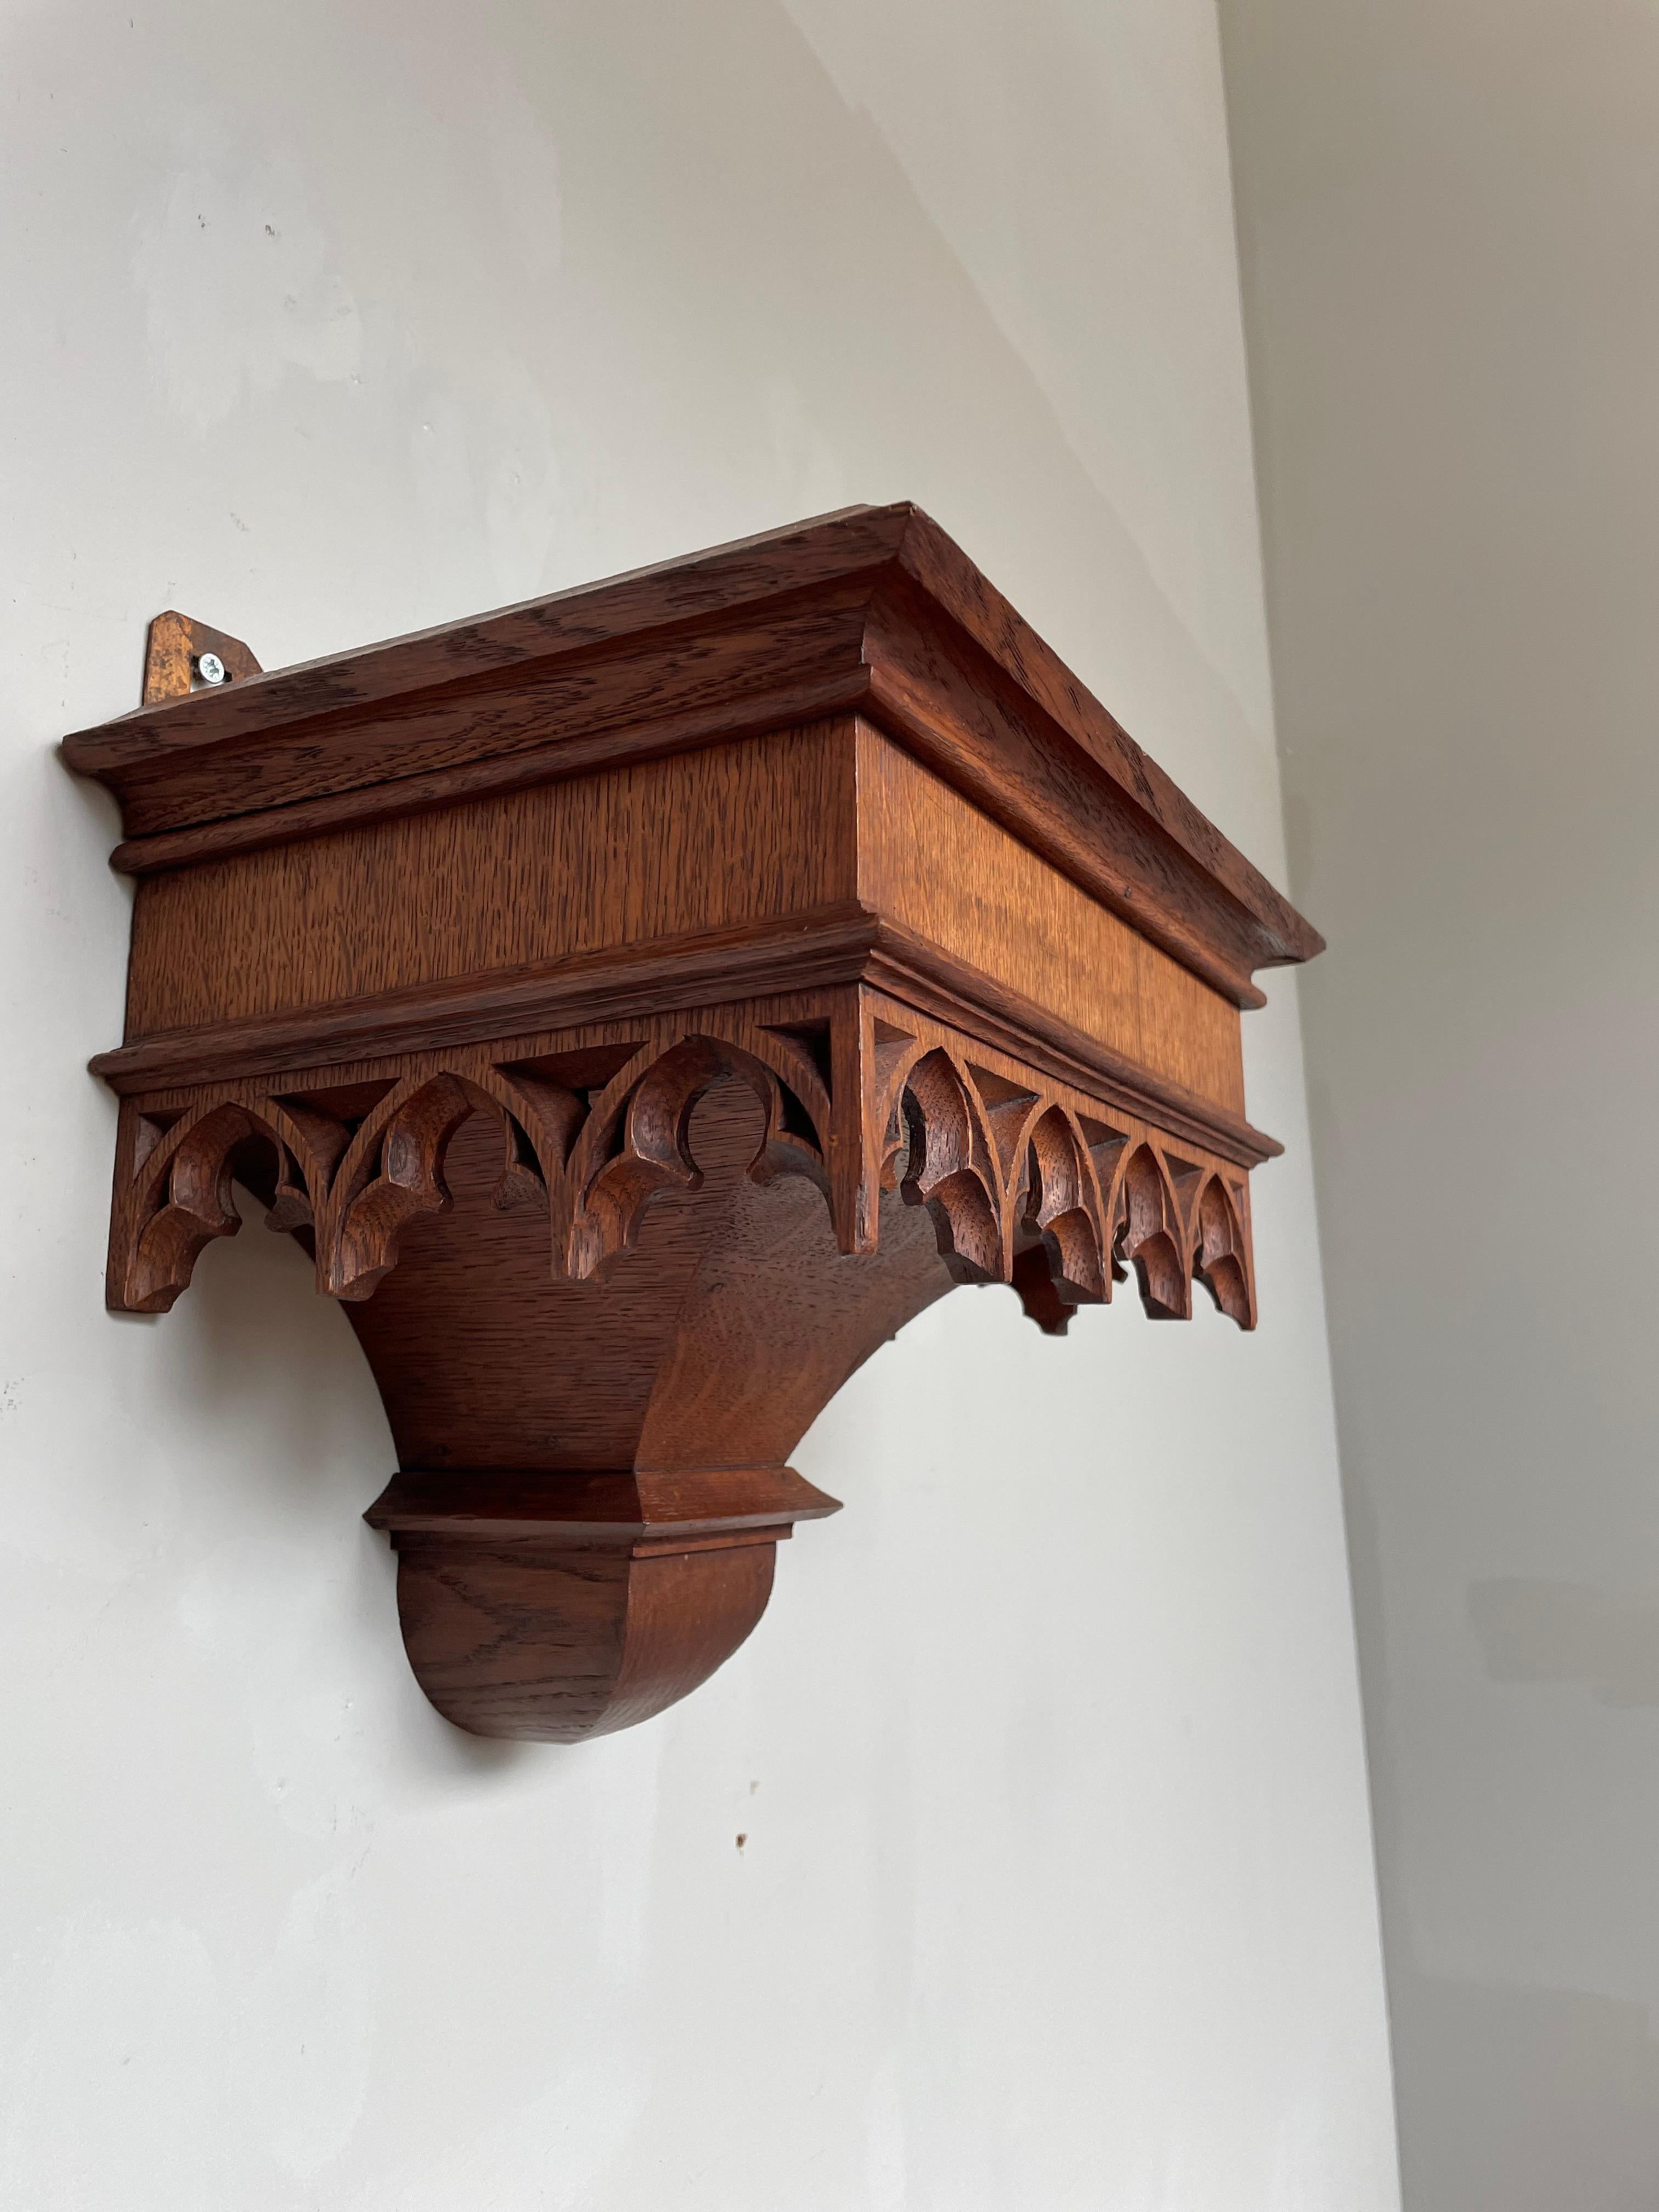 Wonderful and perfectly hand carved, pure Gothic Revival, church wall bracket.

This all handcrafted, Gothic Revival wall bracket has the most wonderful shape and a striking patina. The deeply carved, church window design, carved elements all around